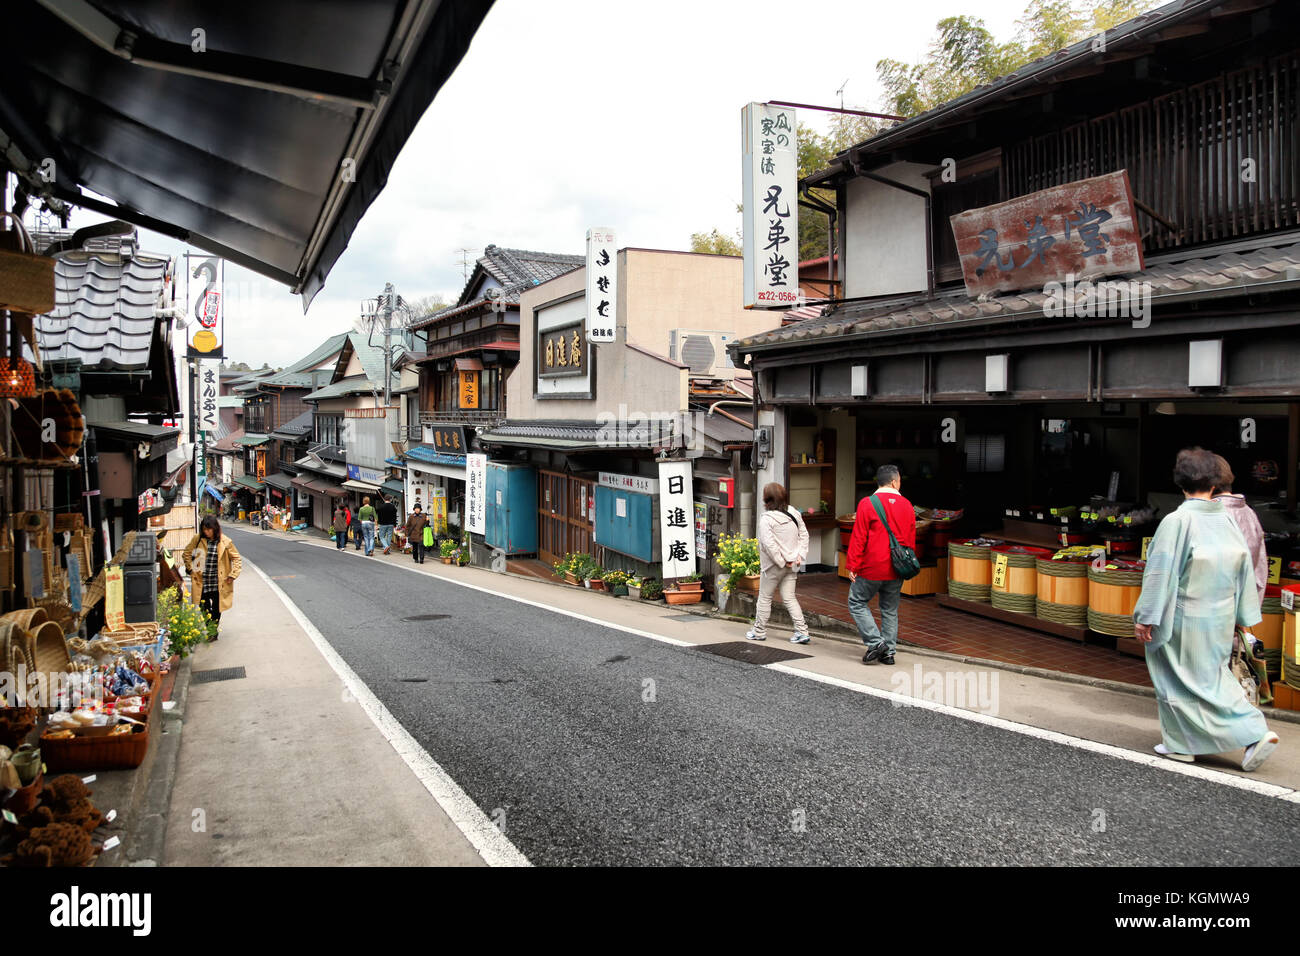 Omote Sando stretches from the NaritaSan Temple to the JR station, offering visitors a nice leisurely stroll through this quaint part of Narita Stock Photo